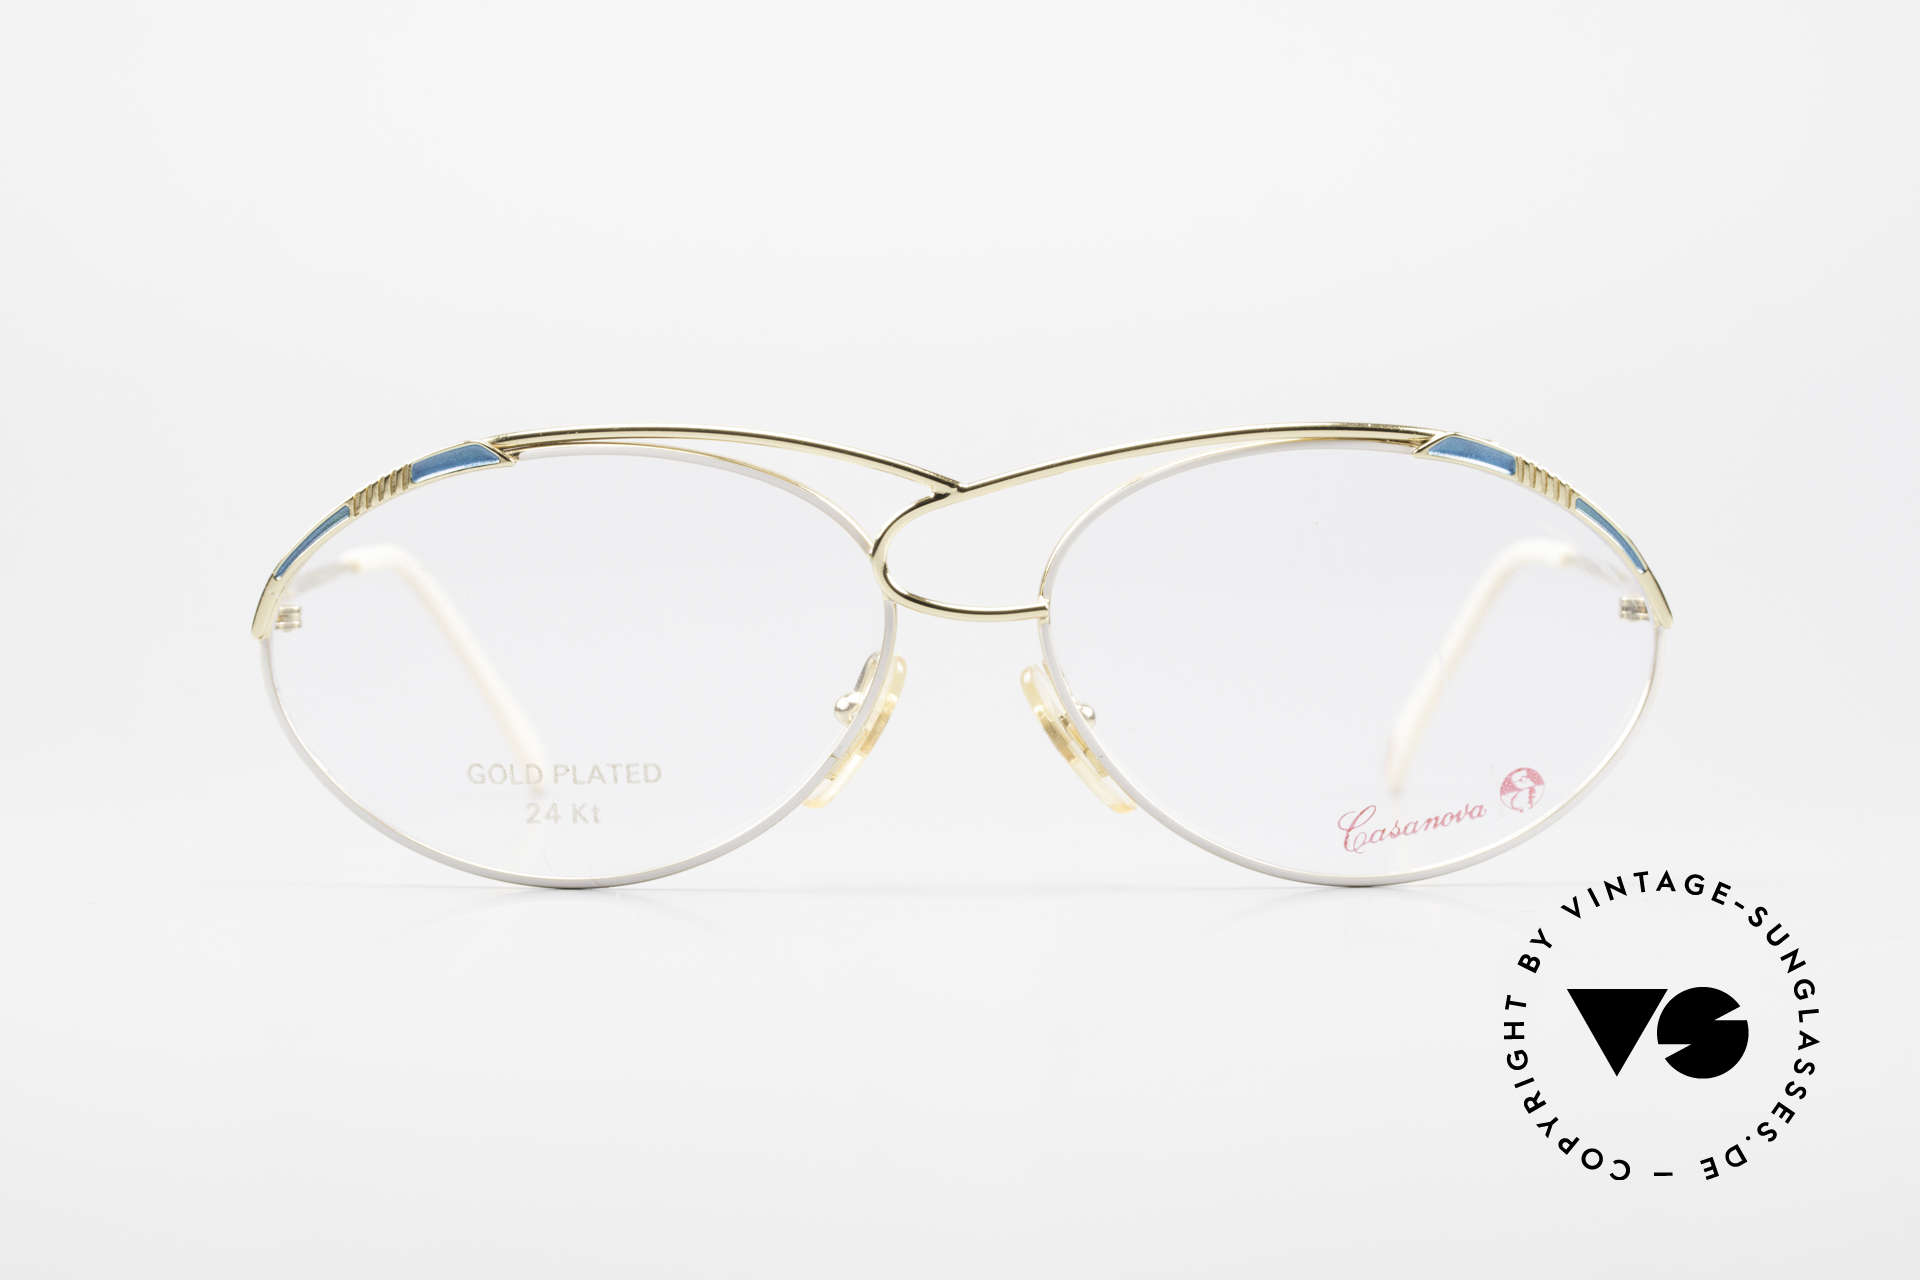 Casanova LC13 24kt Gold Plated Vintage Frame, fantastic combination of colors, shape & functionality, Made for Women